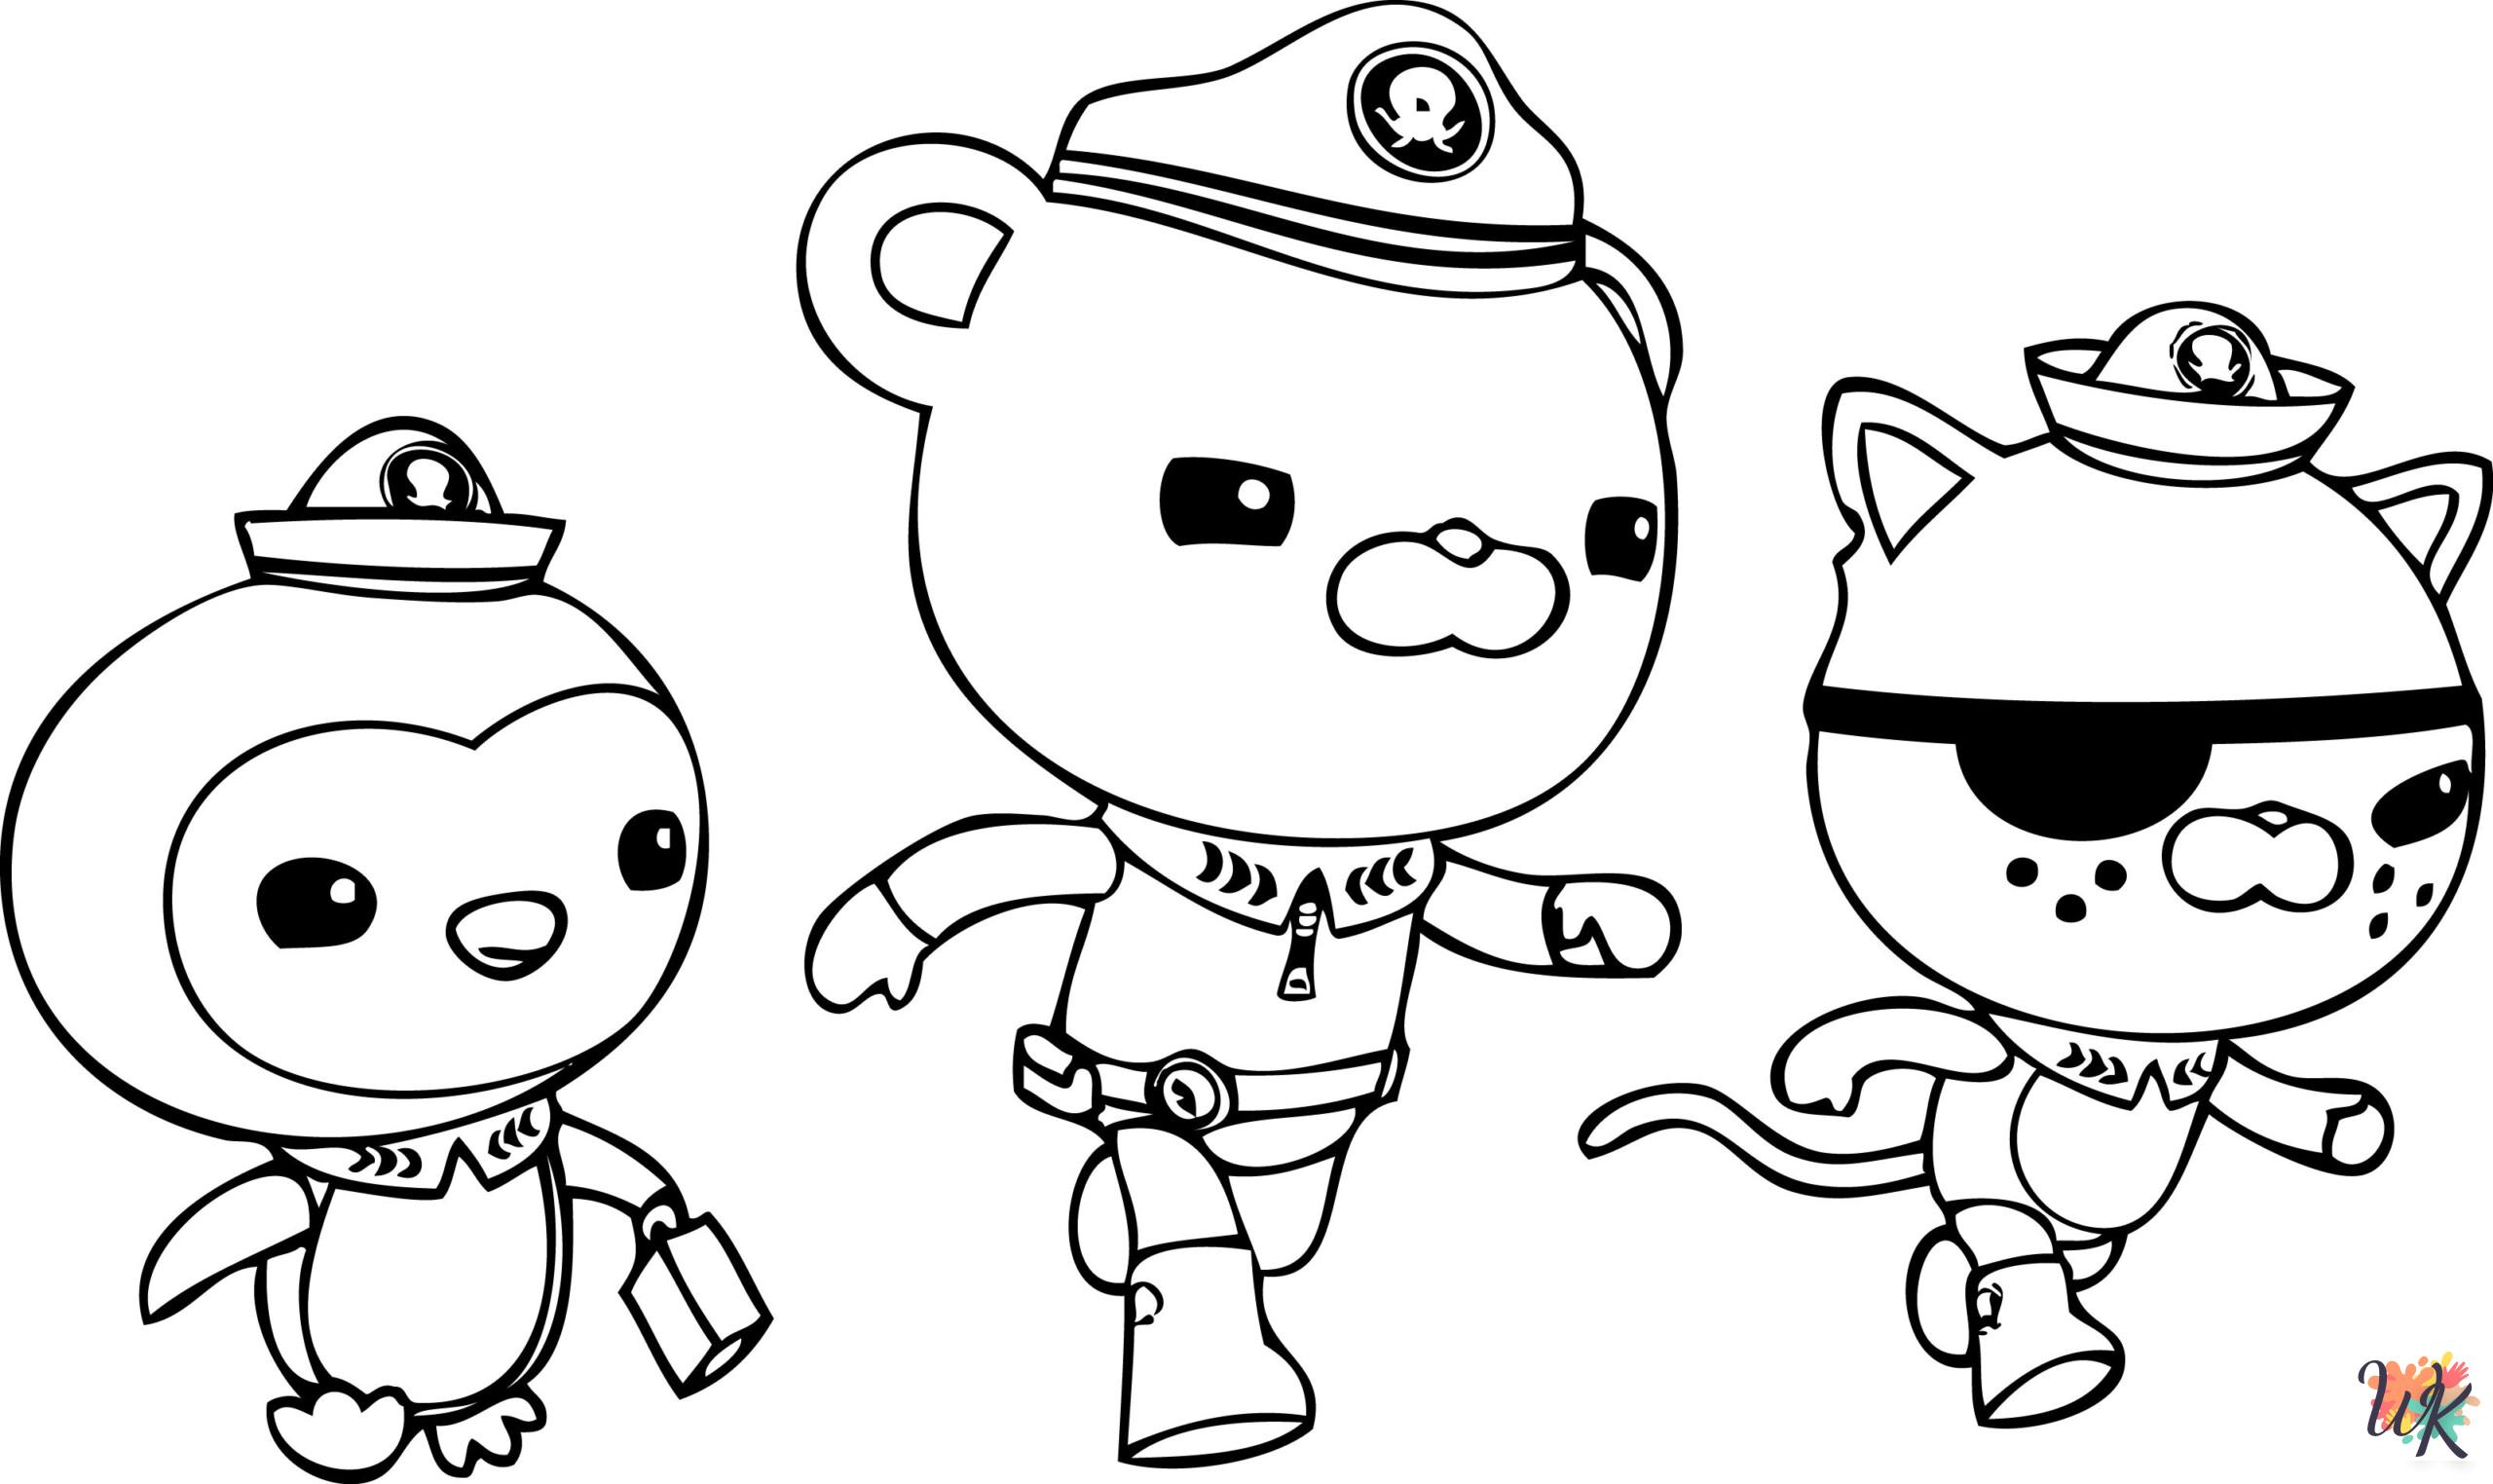 Octonauts coloring pages free